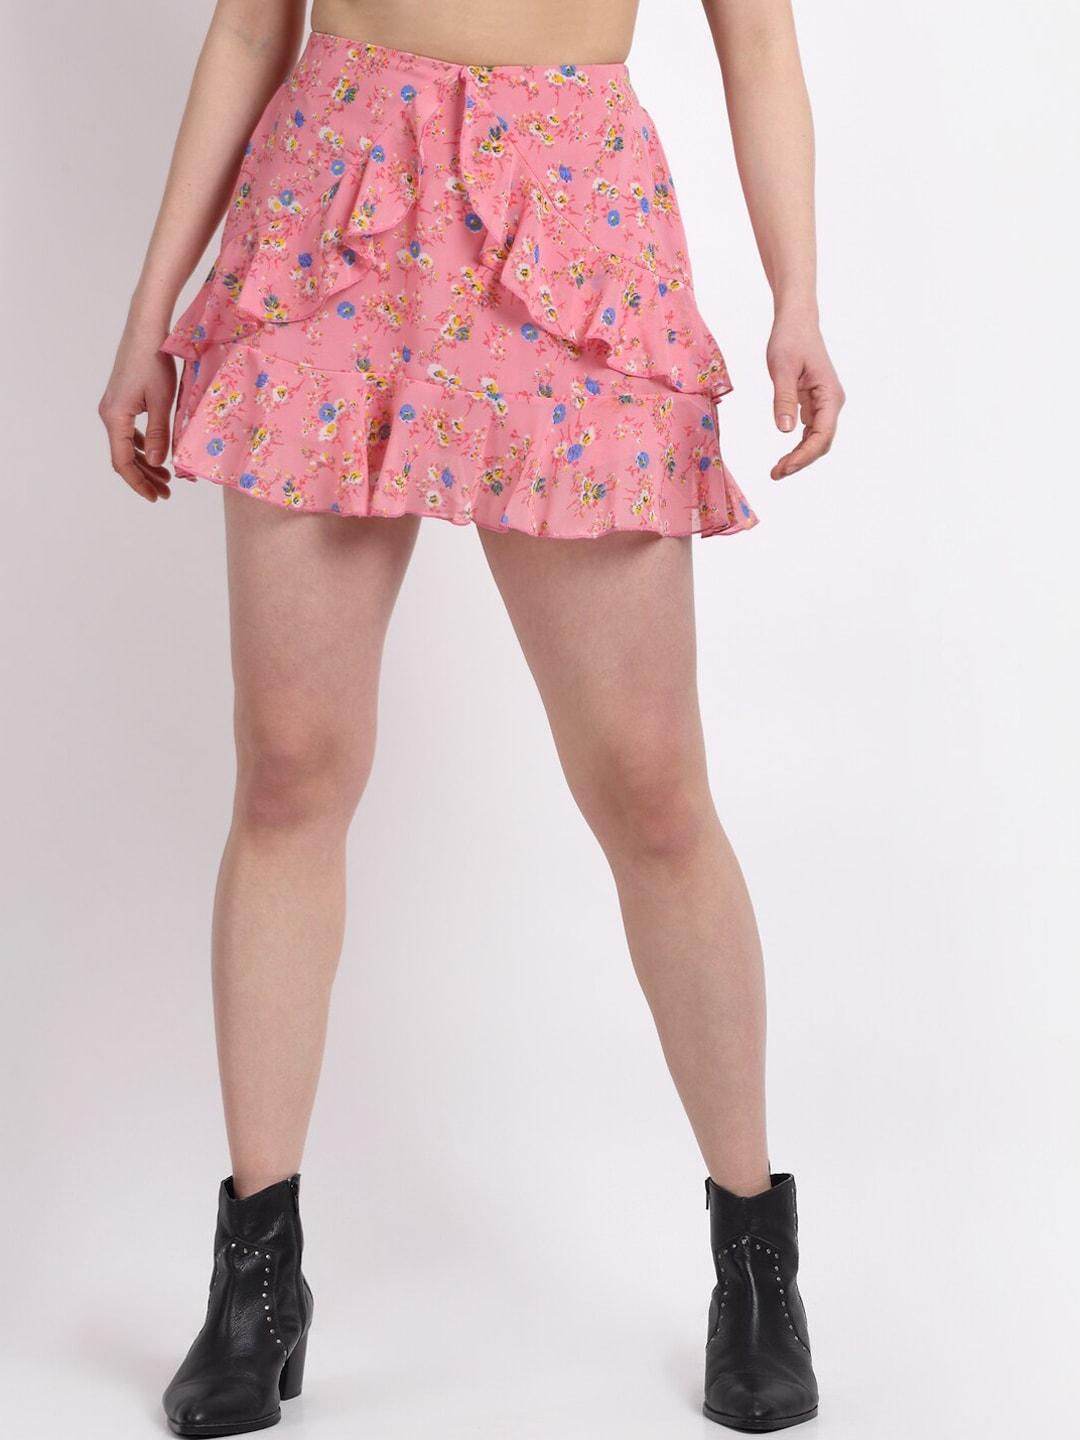 la-zoire-women-pink-printed-skirt-with-frill